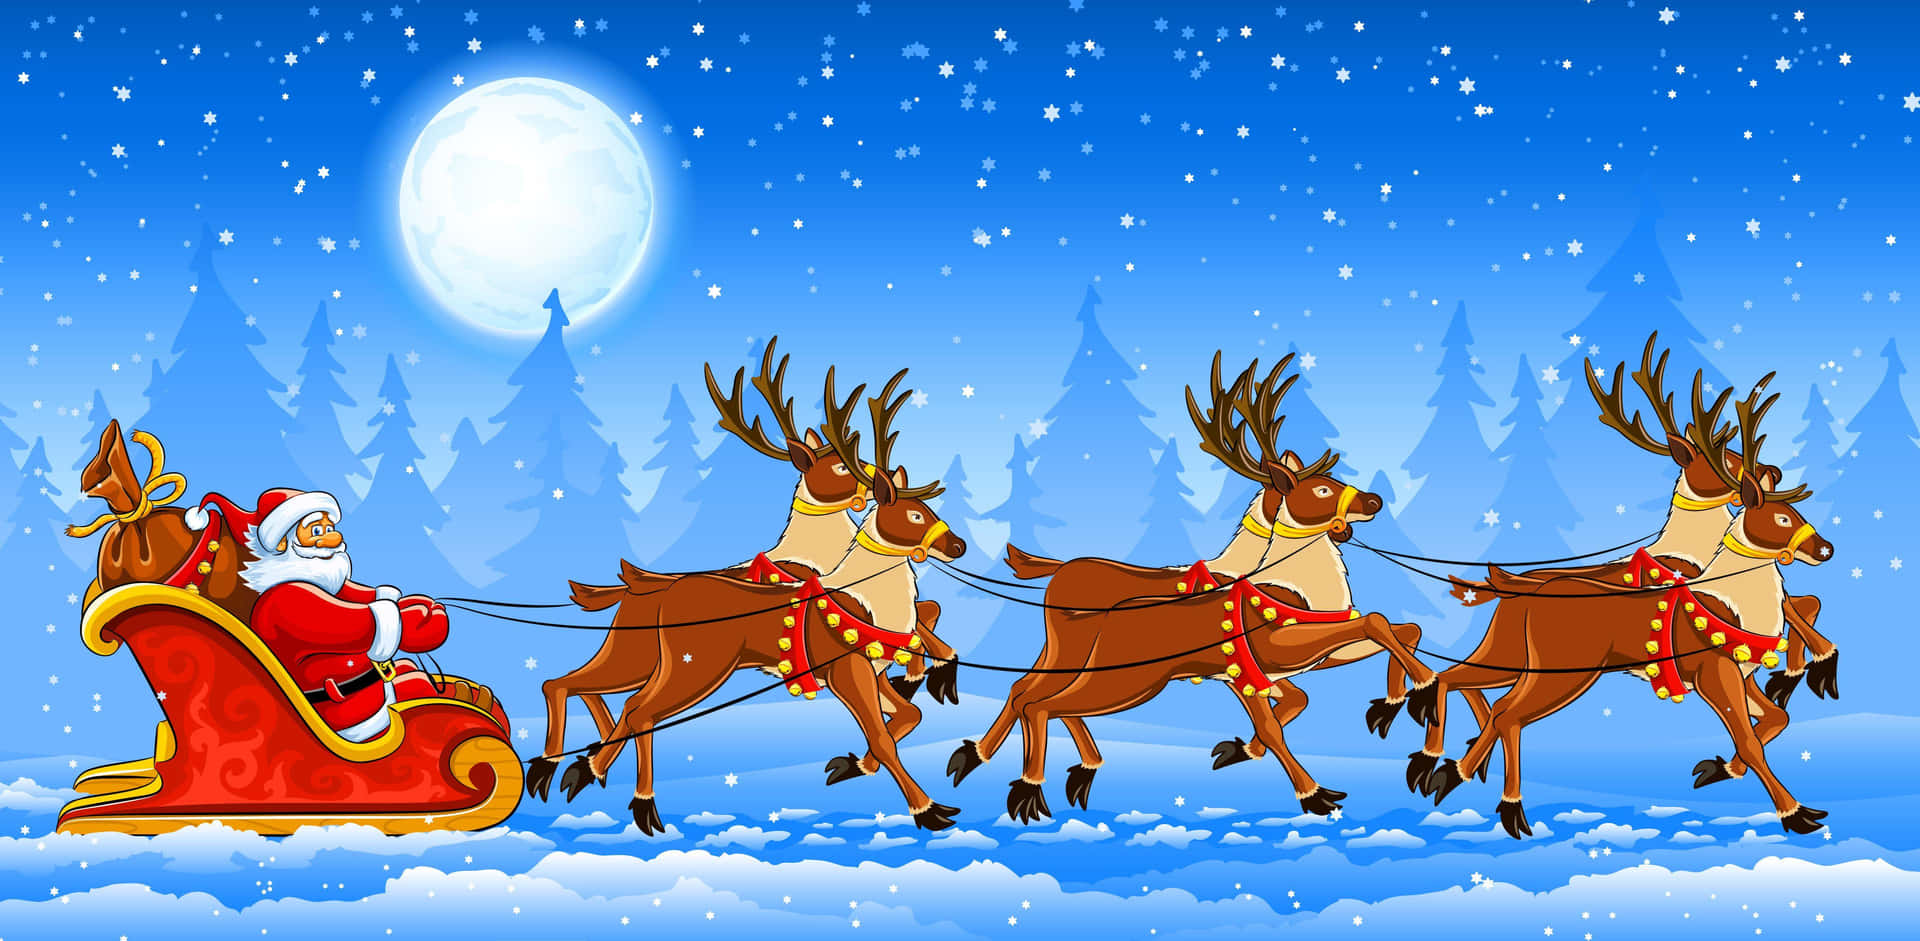 Holidays are coming soon – time to spread some Christmas cheer! Wallpaper